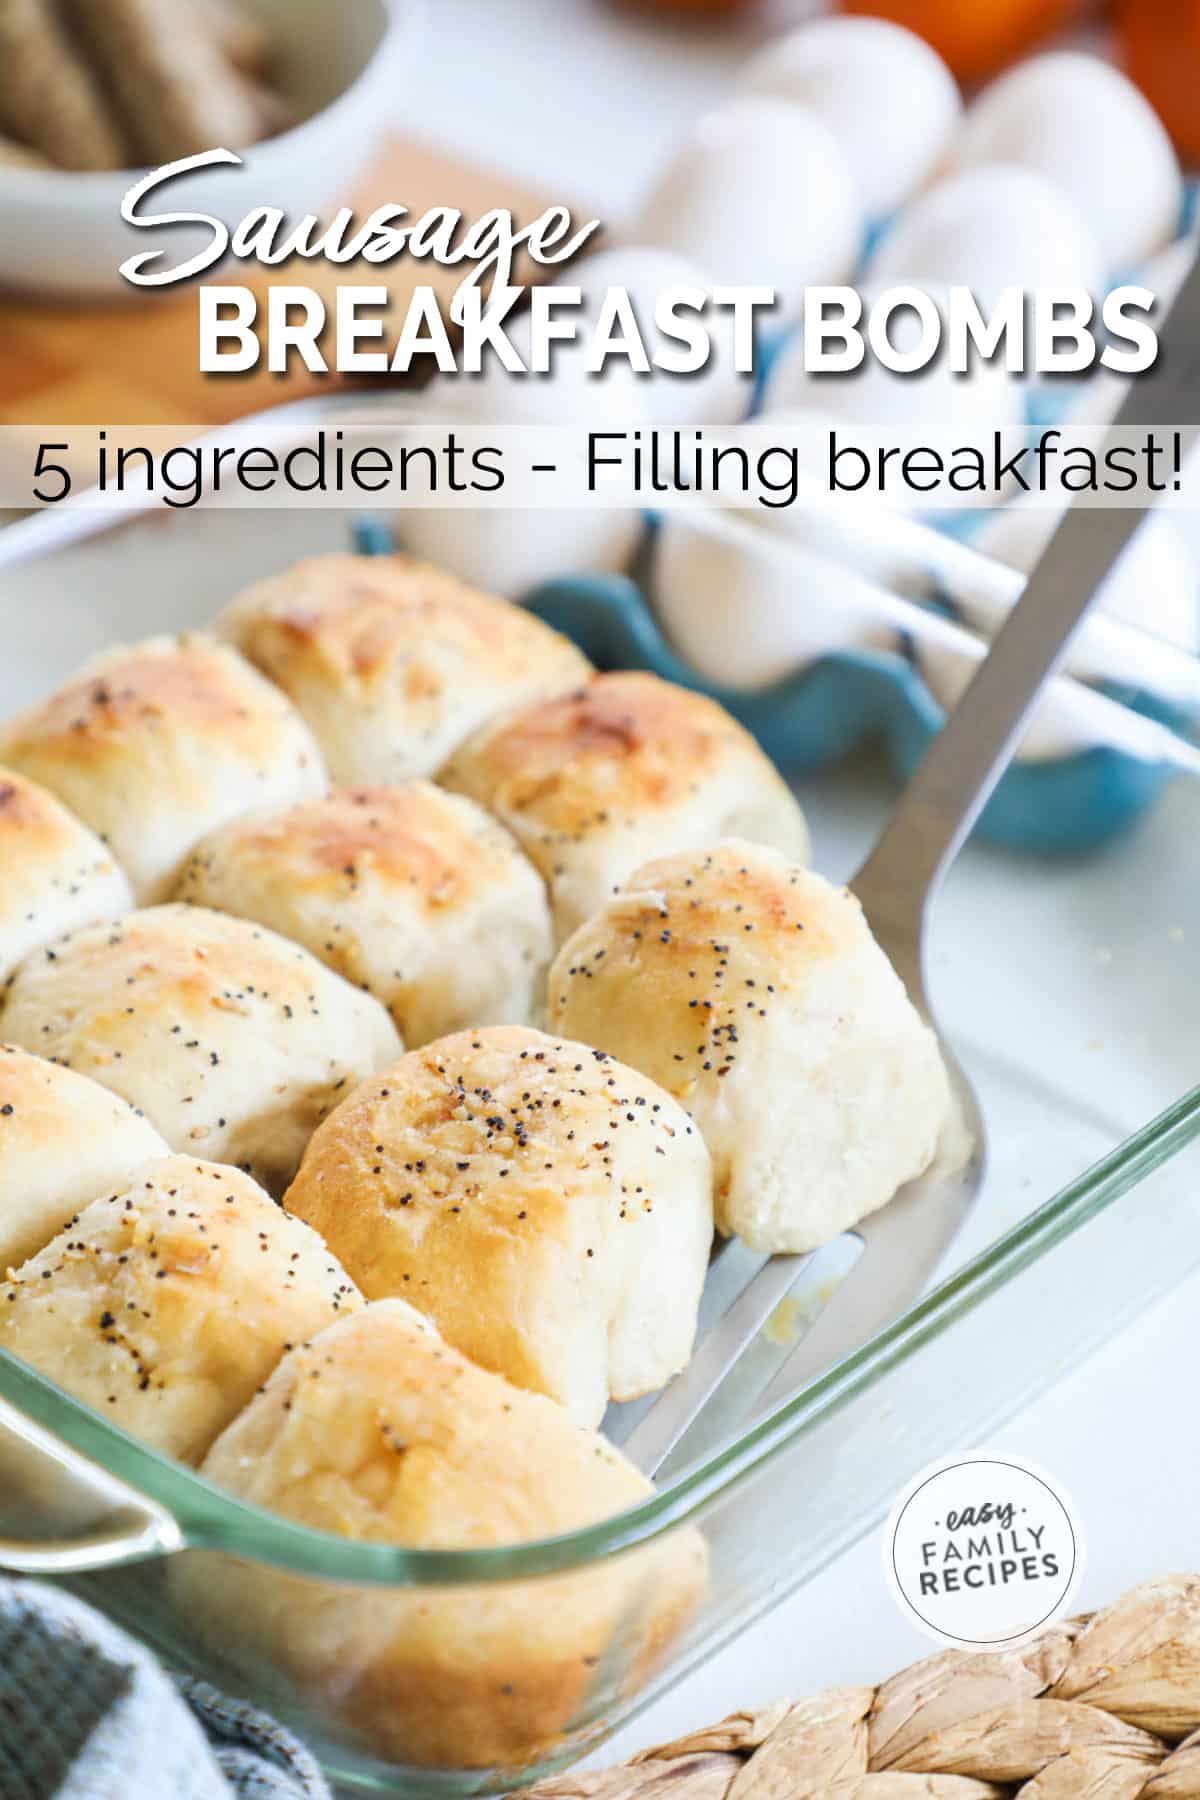 Biscuit Breakfast Bombs baked in a casserole dish